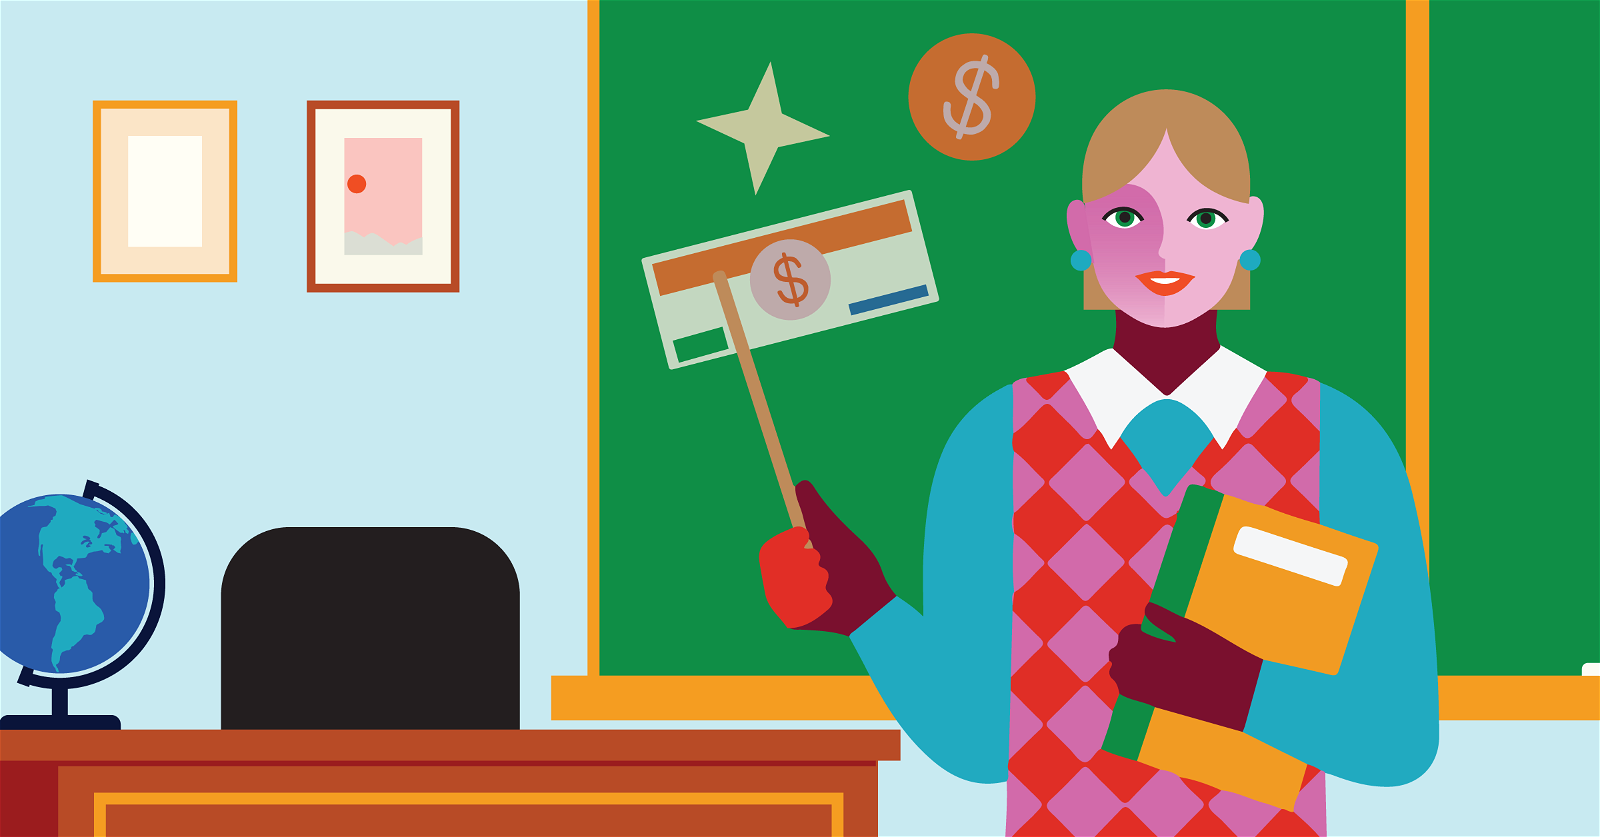 Illustration of a teacher holding a pointer and a book in a classroom. The background features a green chalkboard with a star, dollar bill, and coin symbols, a globe on a desk, a chair, and framed pictures on the wall. The teacher is wearing a red diamond-patterned vest and has light-colored hair.